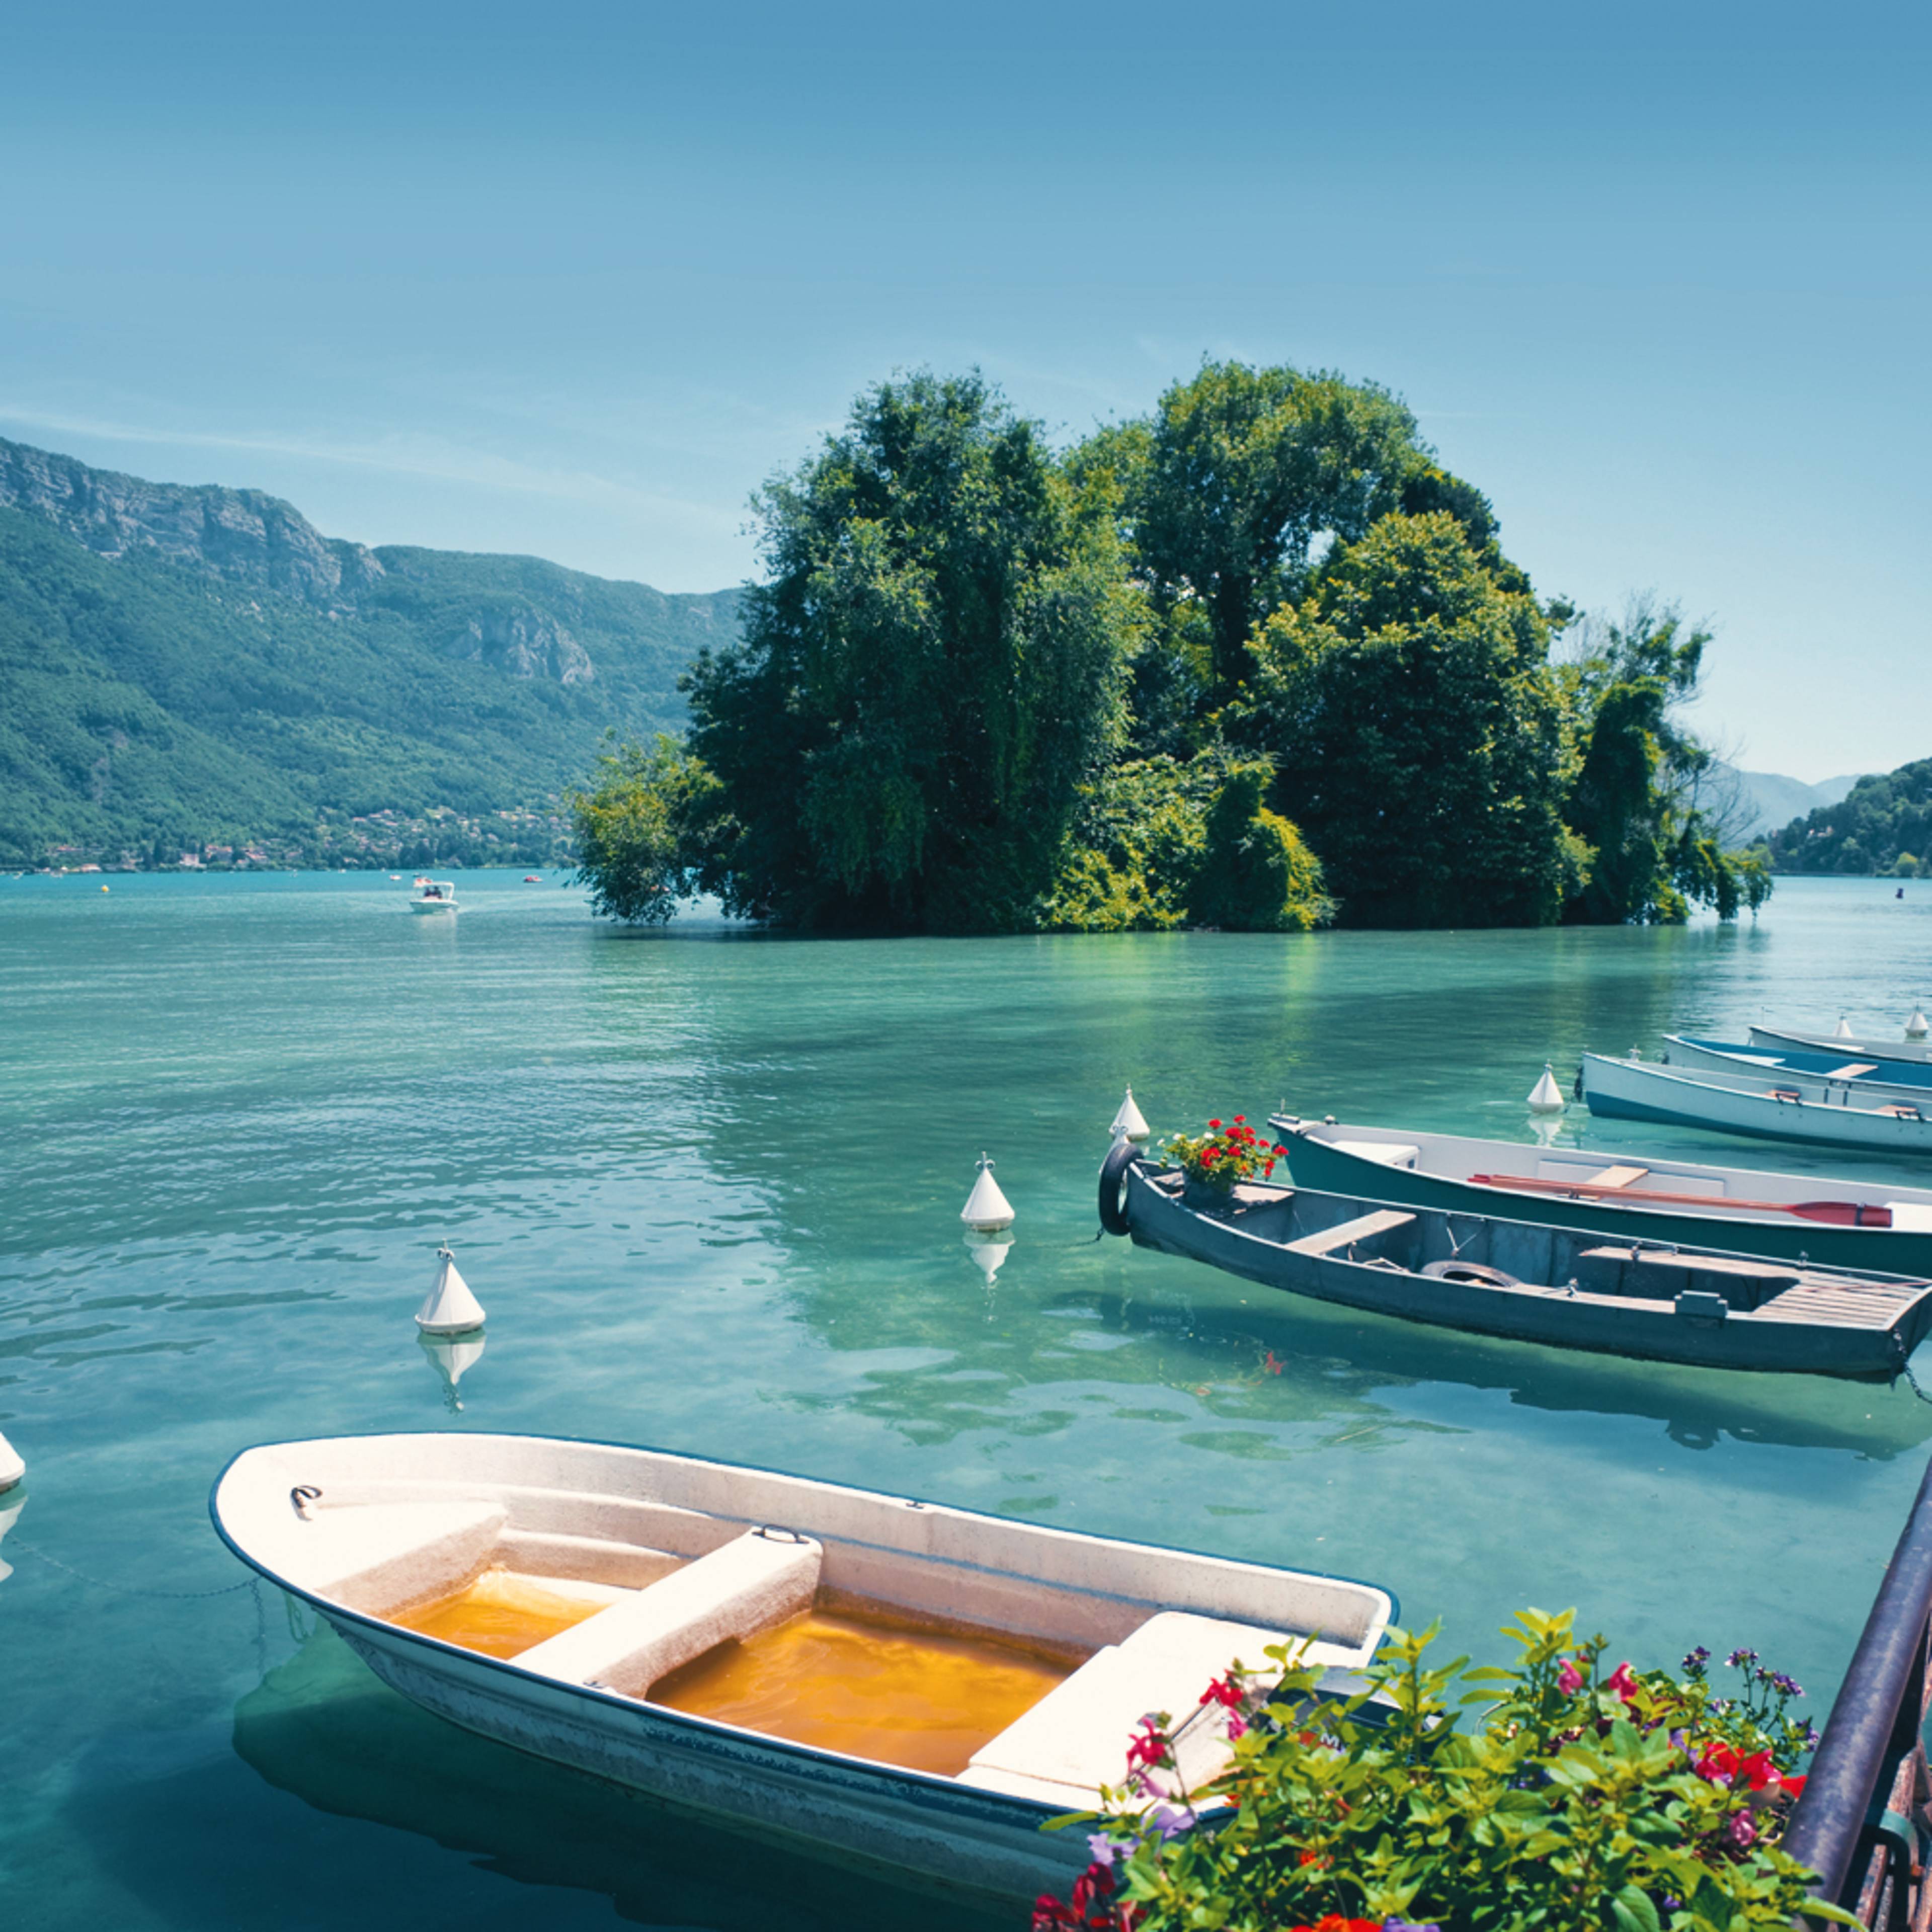 Design your perfect tour of France's lakes with a local expert